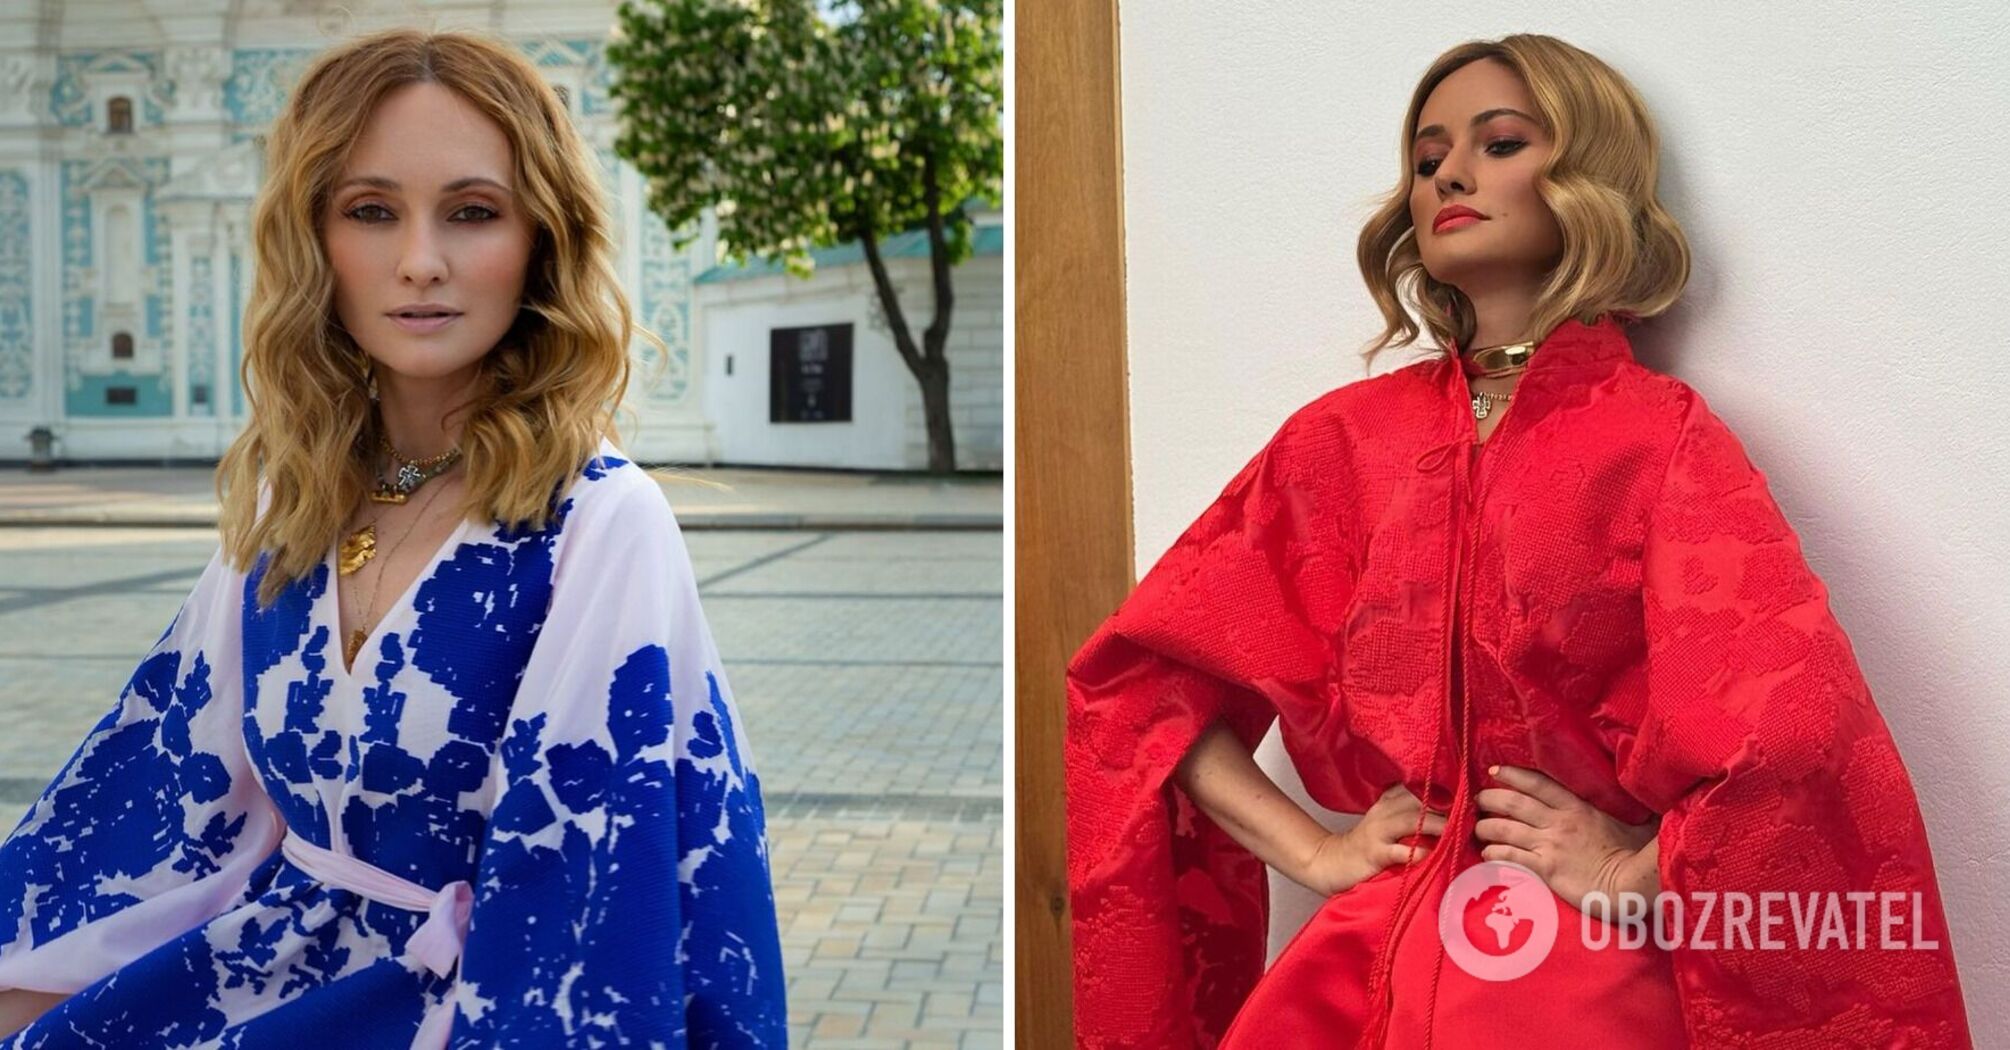 It goes up to $10 thousand. Ukrainian designer Yulia Mahdych explains why her embroidered shirts are so expensive